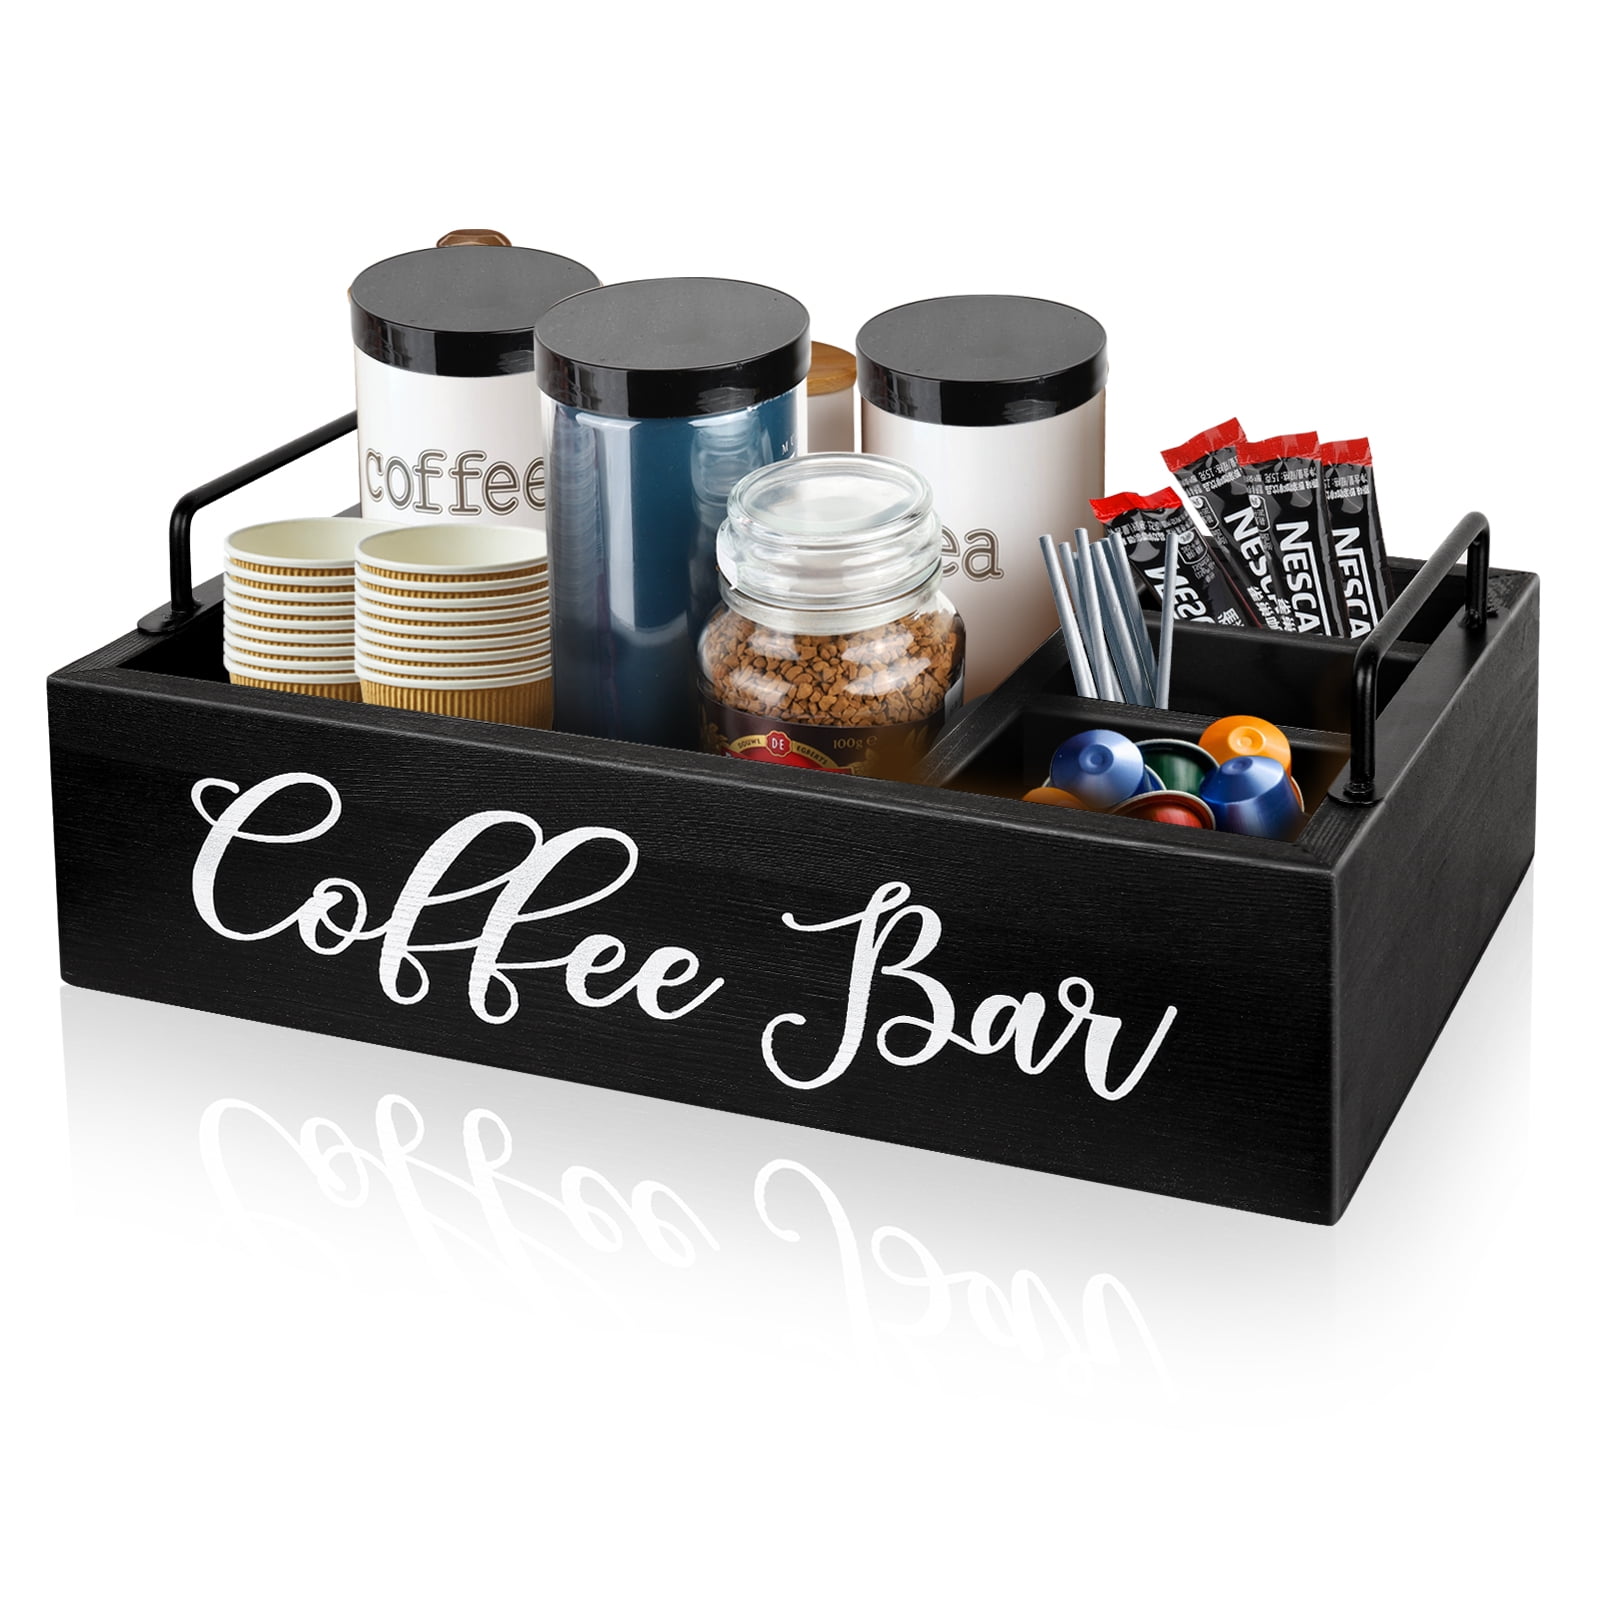 ugiftt Coffee Station Organizer for Counter, Wood Coffee Pods Holder  Storage Basket, Coffee and Tea Condiment Storage Organizer, Rustic Coffee  Bar